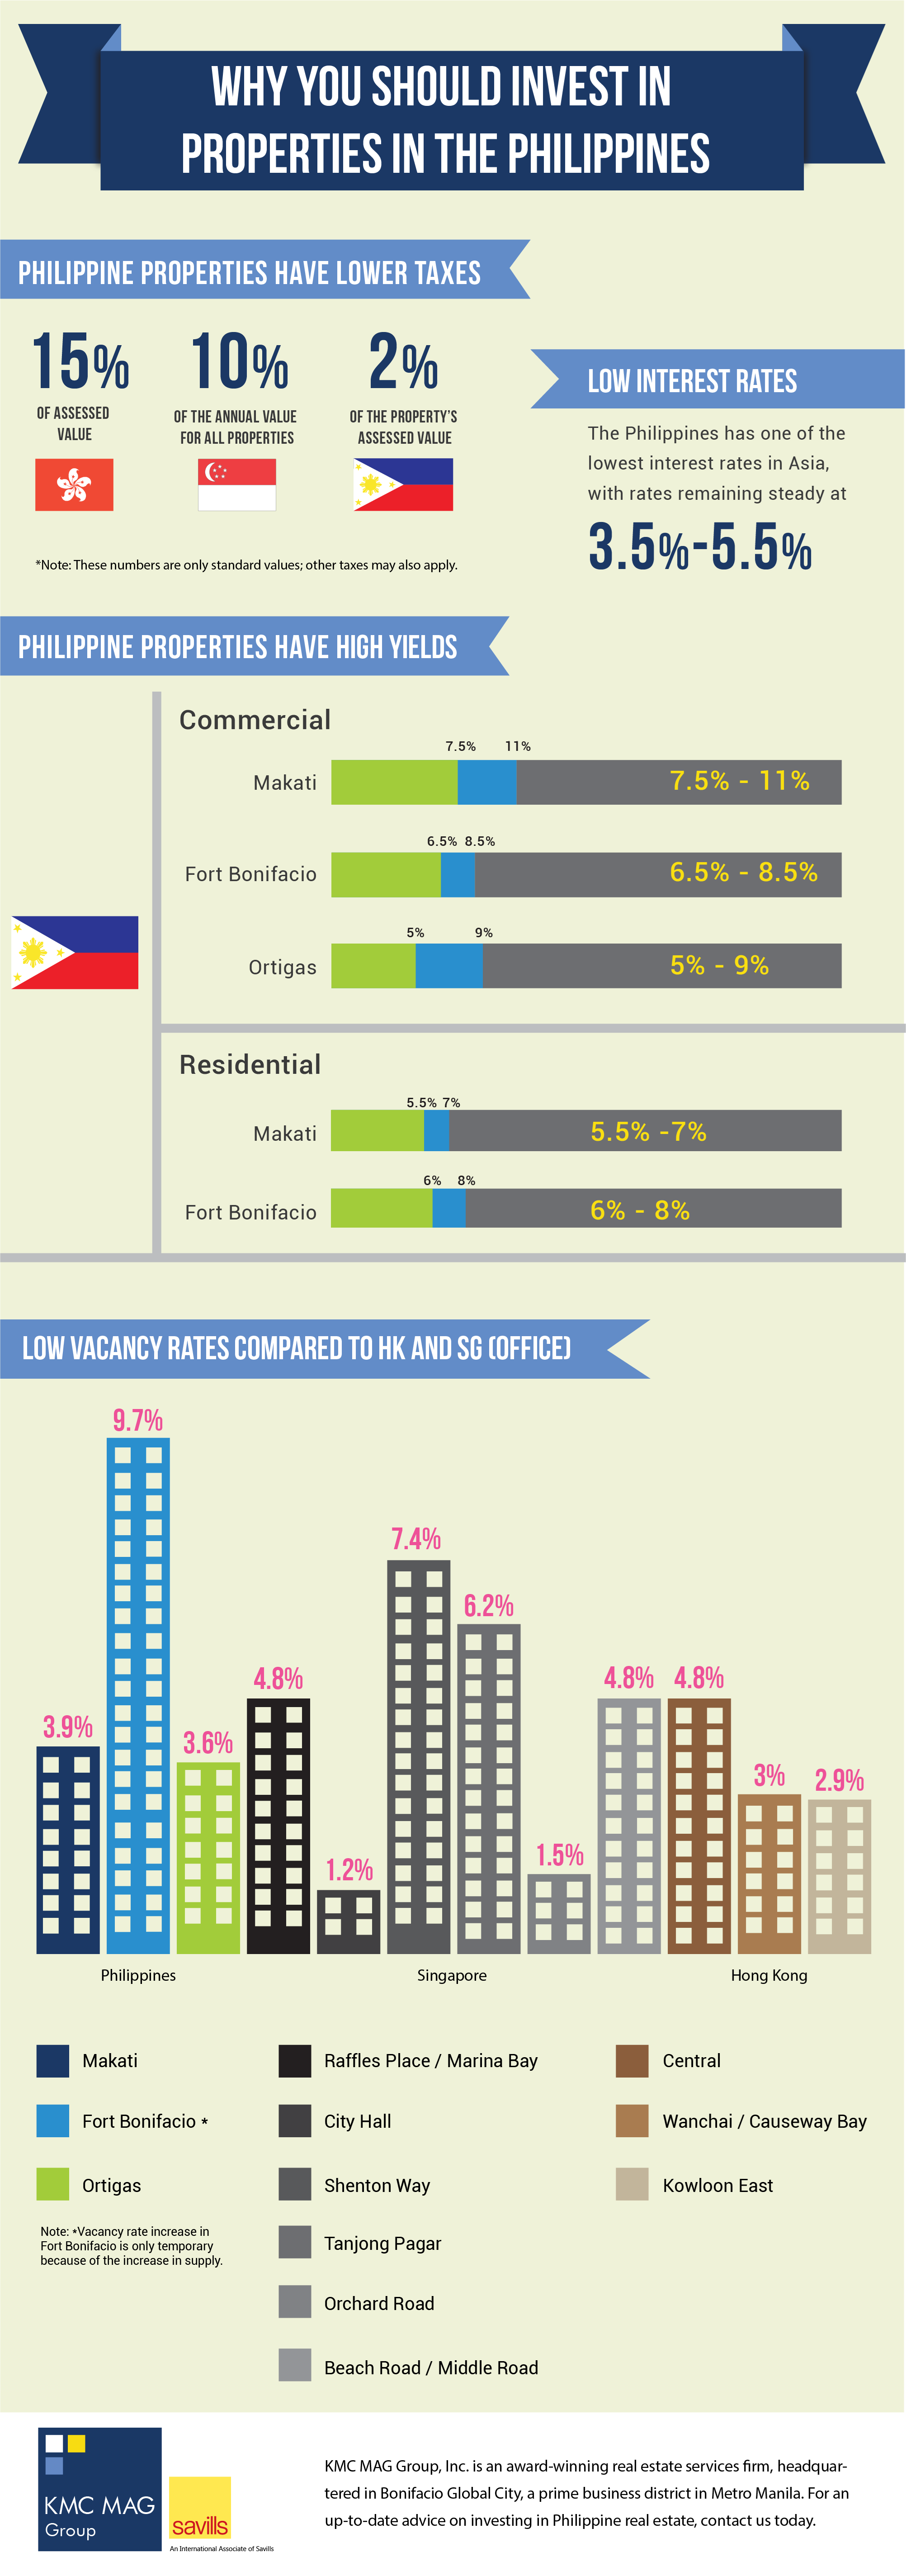 Invest in Philippine Commercial and Residential Properties